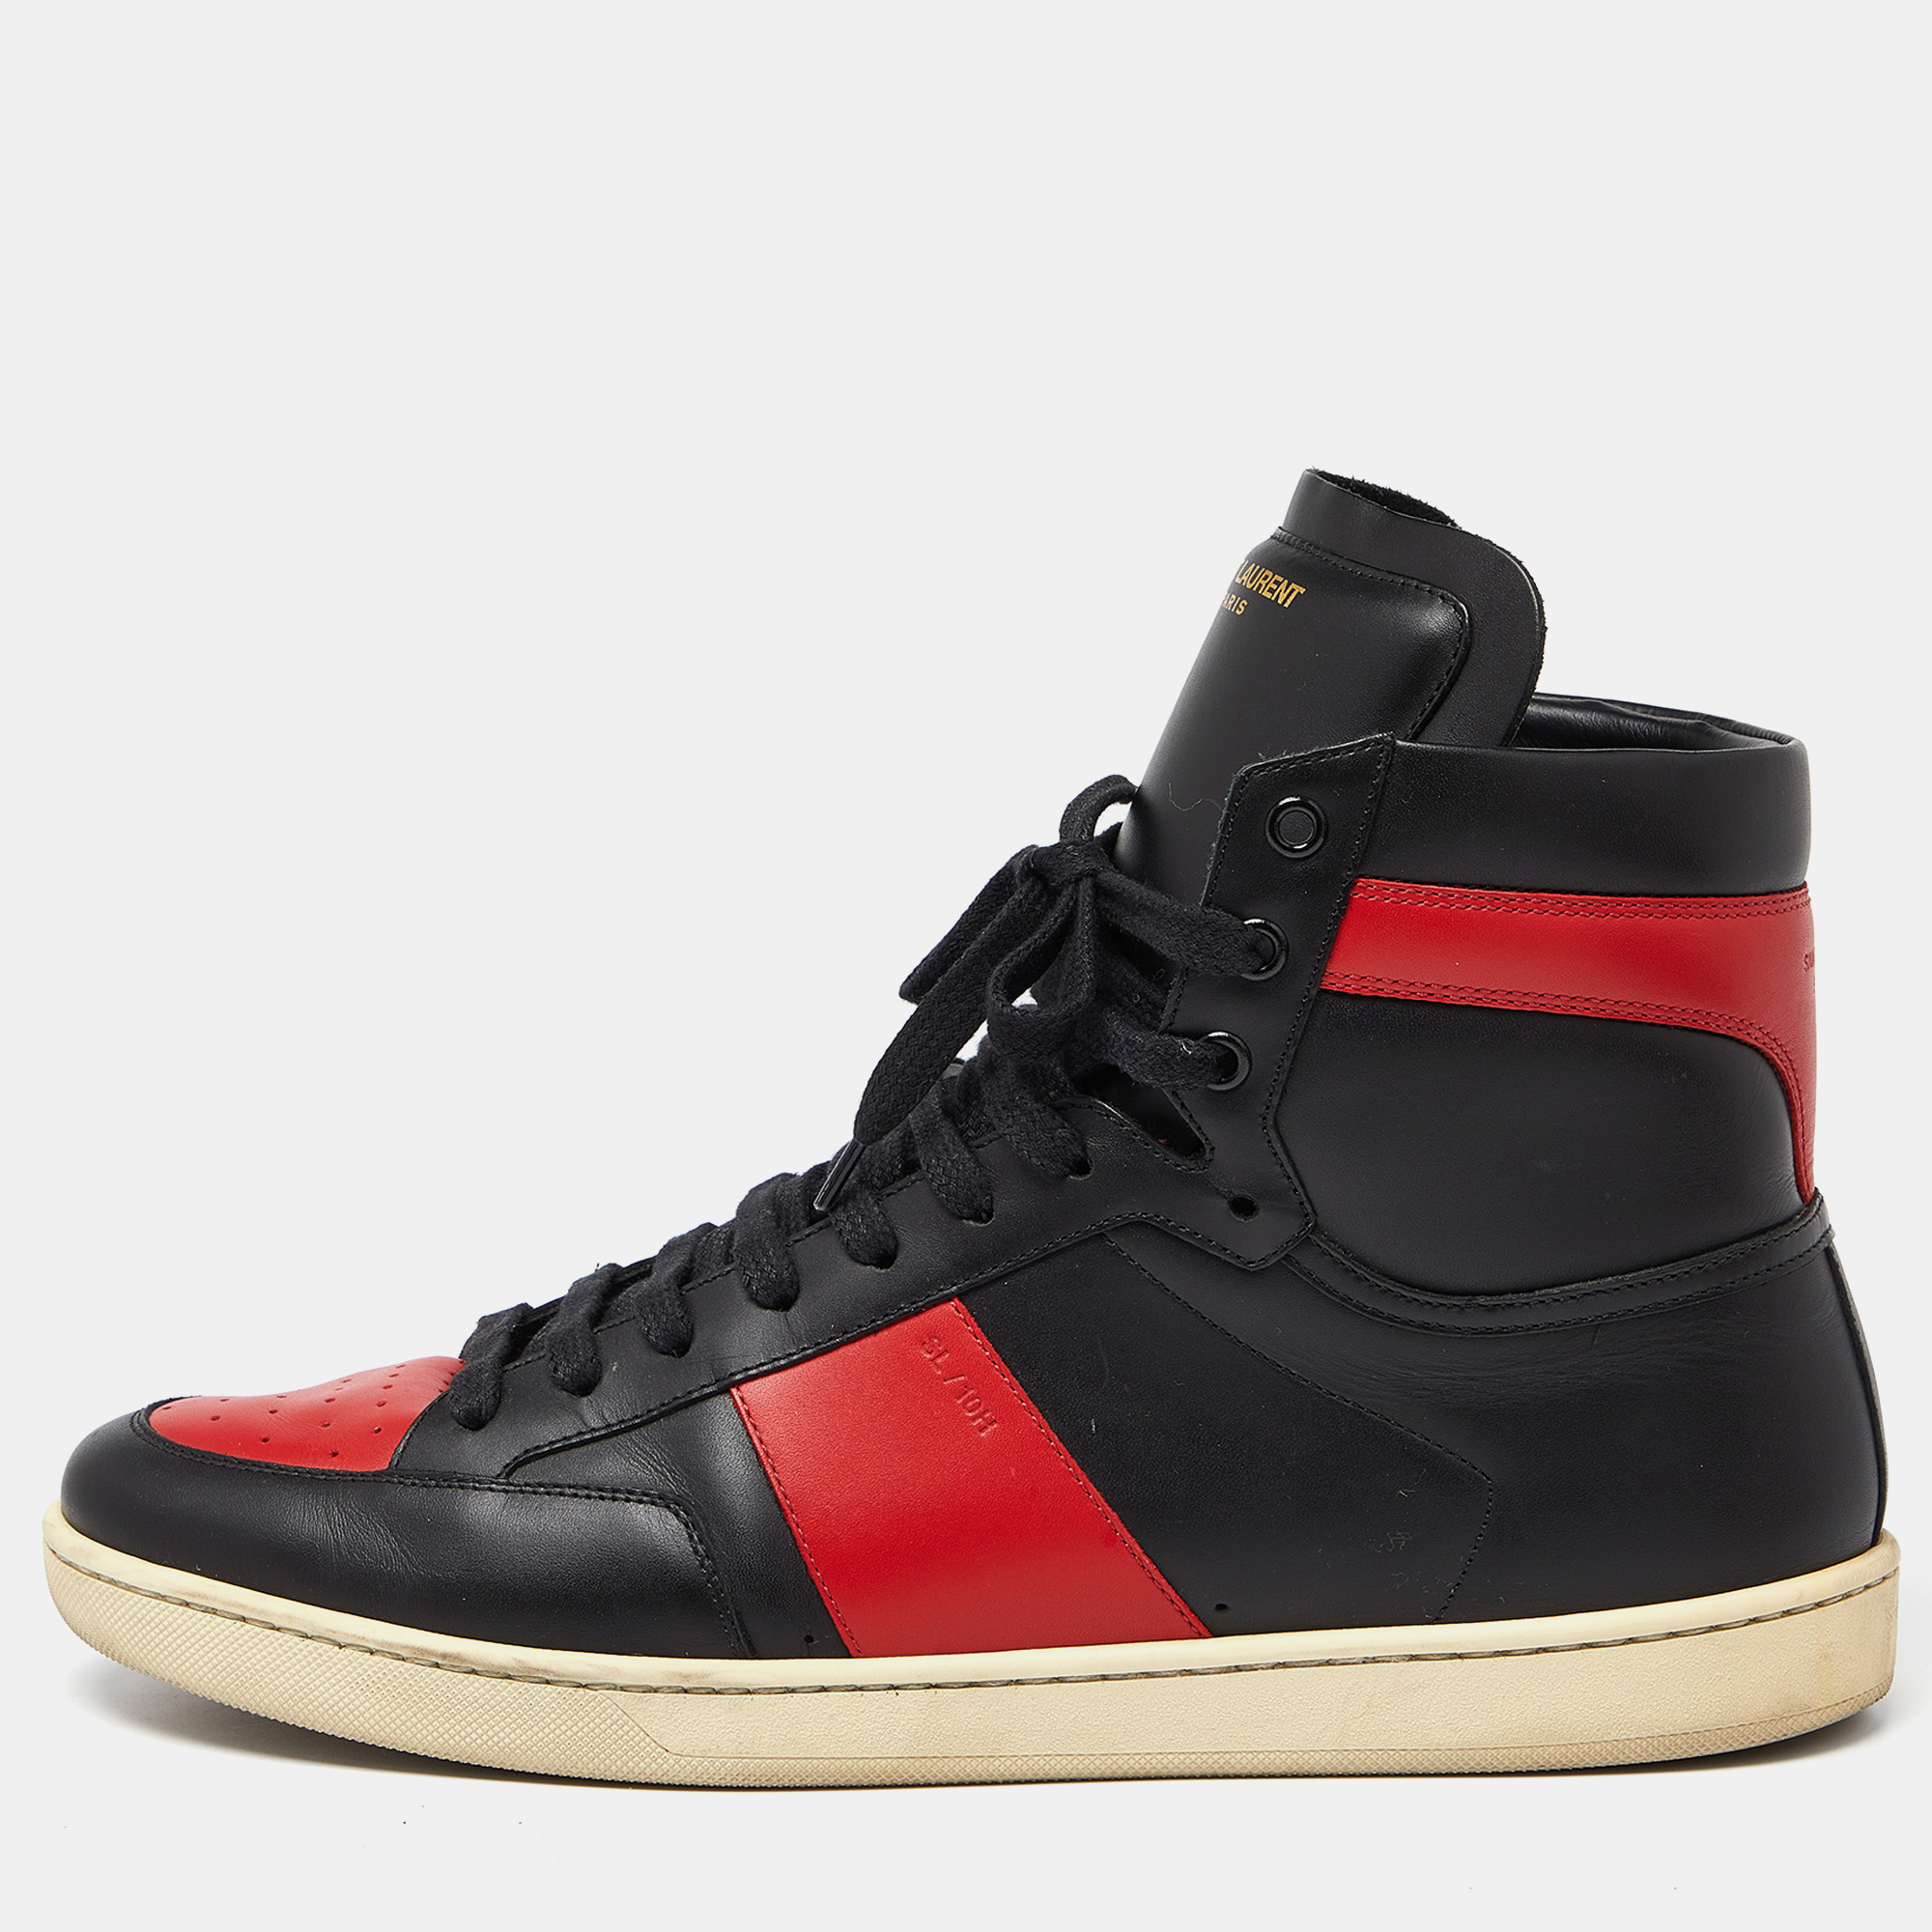 

Saint Laurent Black/Red Leather SL-10H High Top Sneakers Size